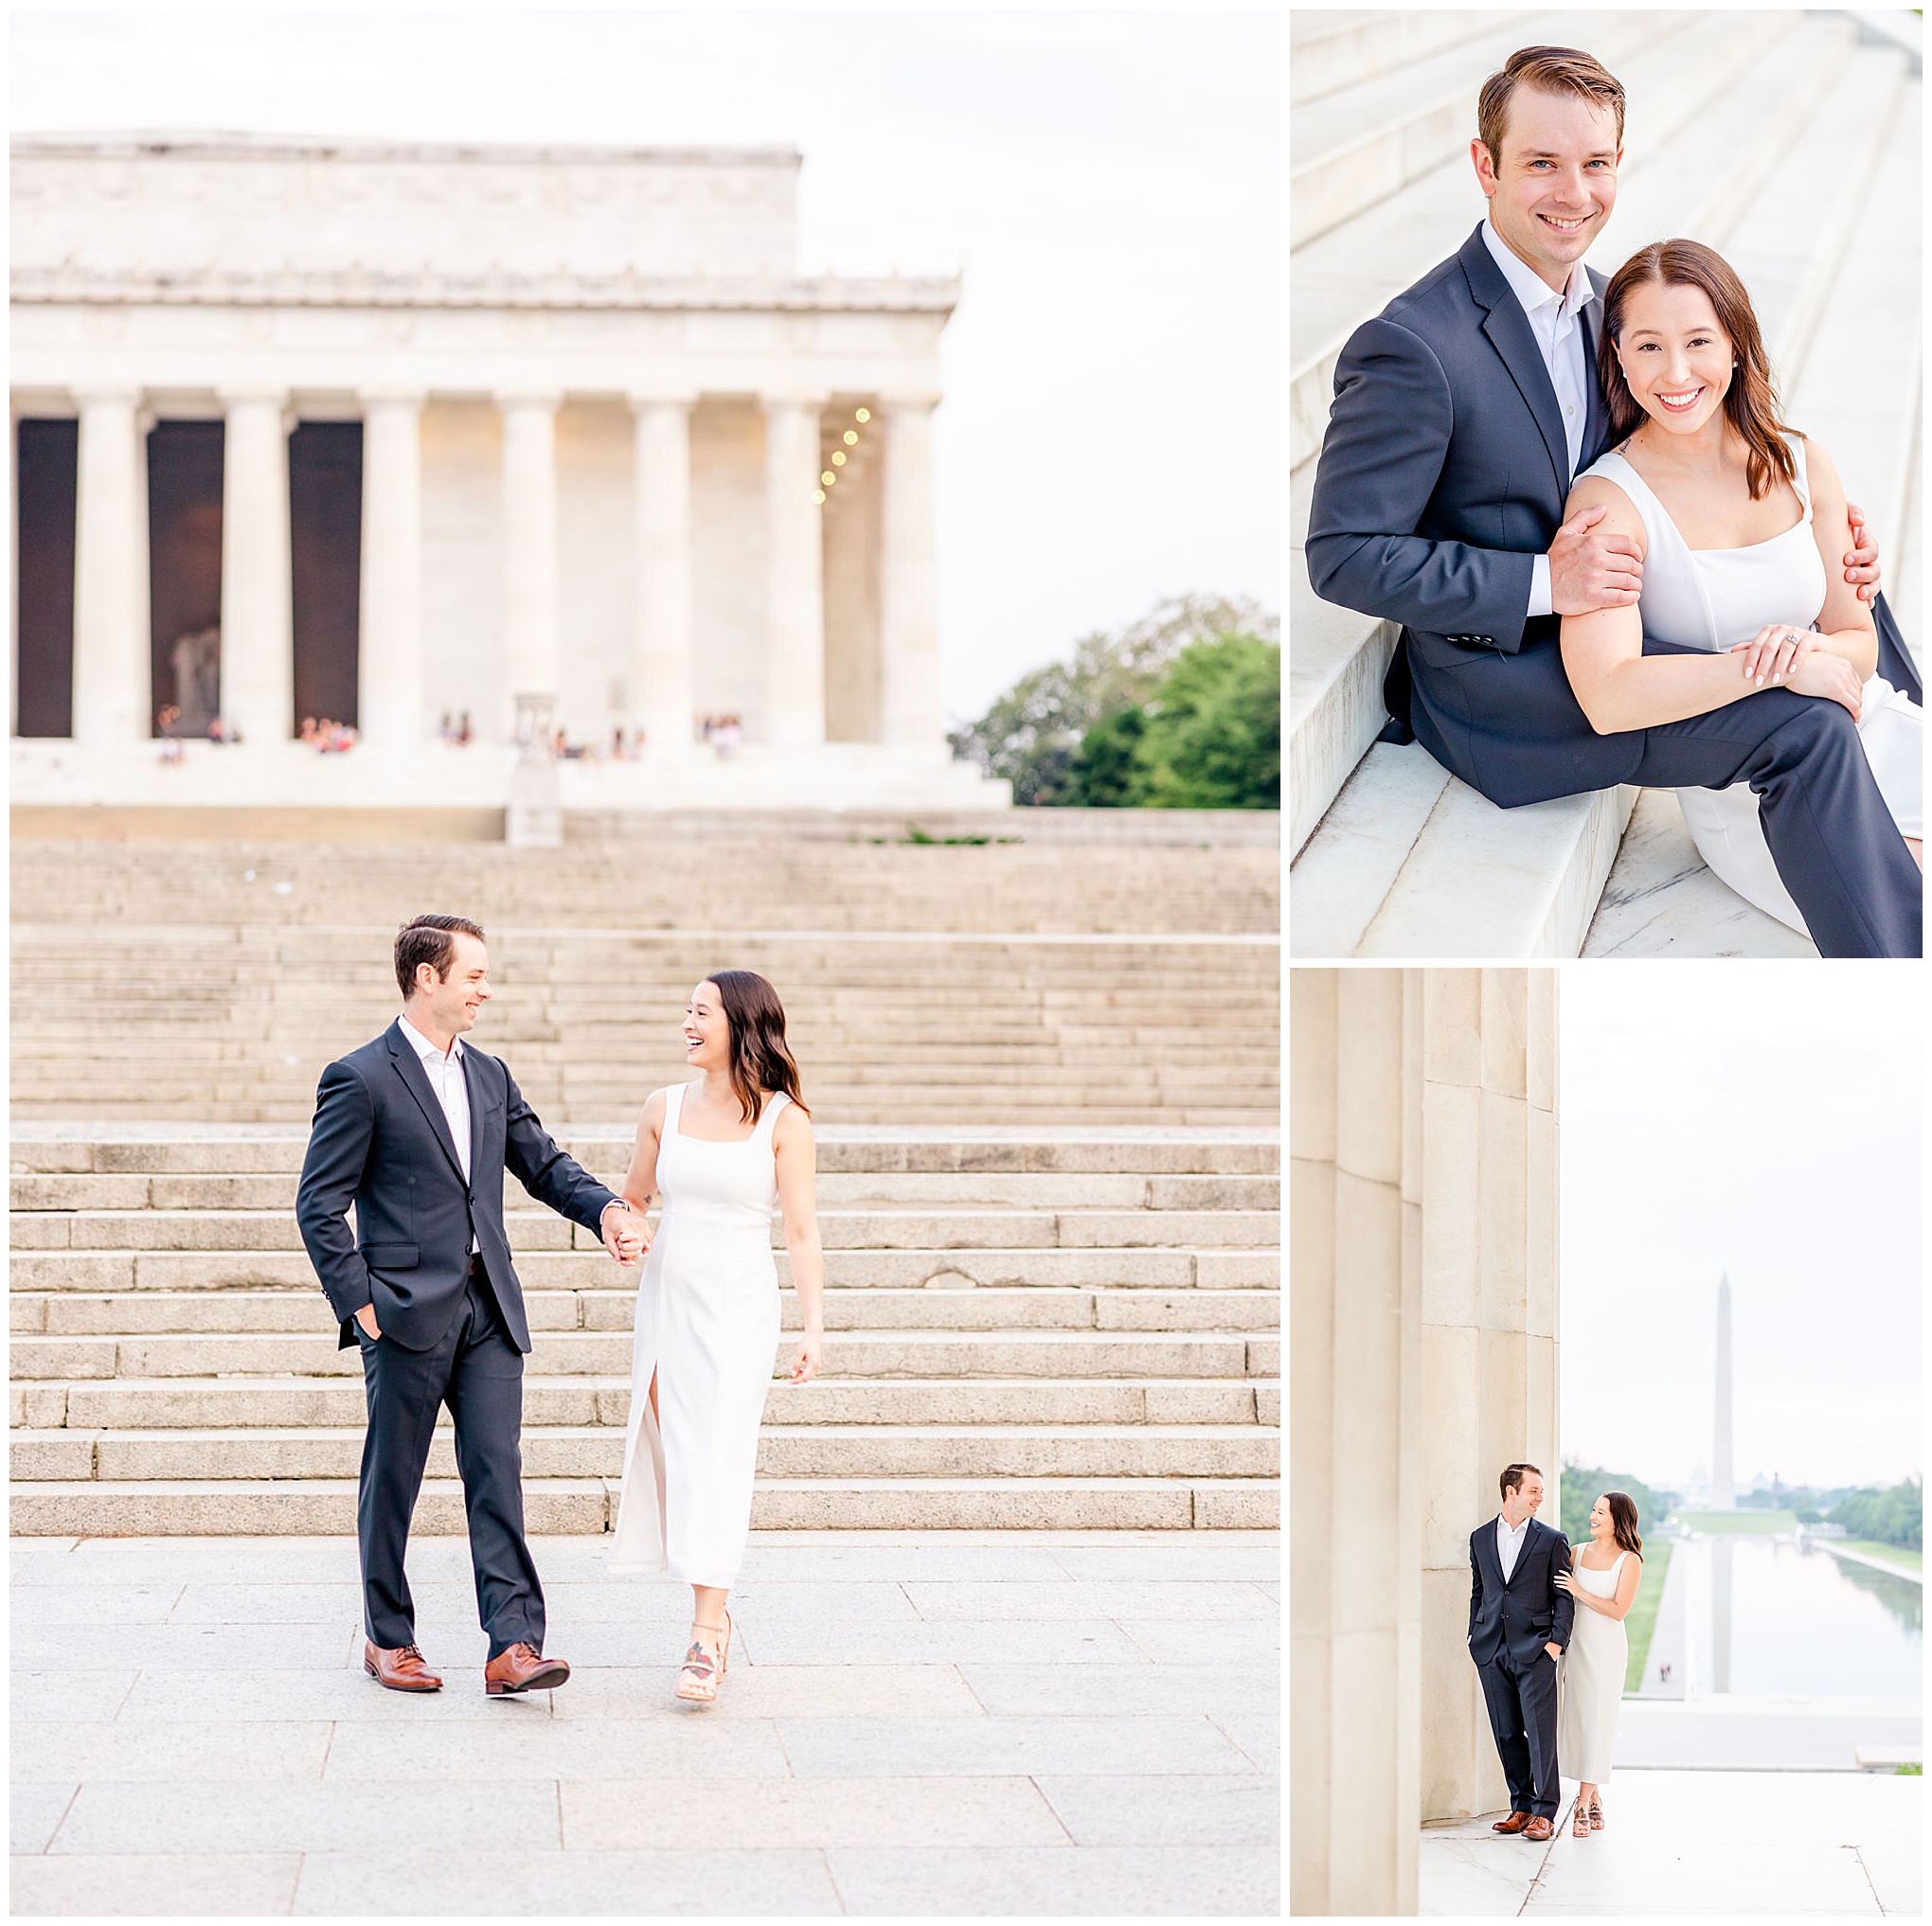 pink sunrise Lincoln Memorial engagement, DC engagement session, DC engagement photographer, formal DC engagement photos, DC elopement photographer, DC wedding photographer, classic DC engagement photos, luxury DC engagement photographer, Rachel E.H. Photography, man sitting on stairs, couple sitting on stairs, couple holding hands